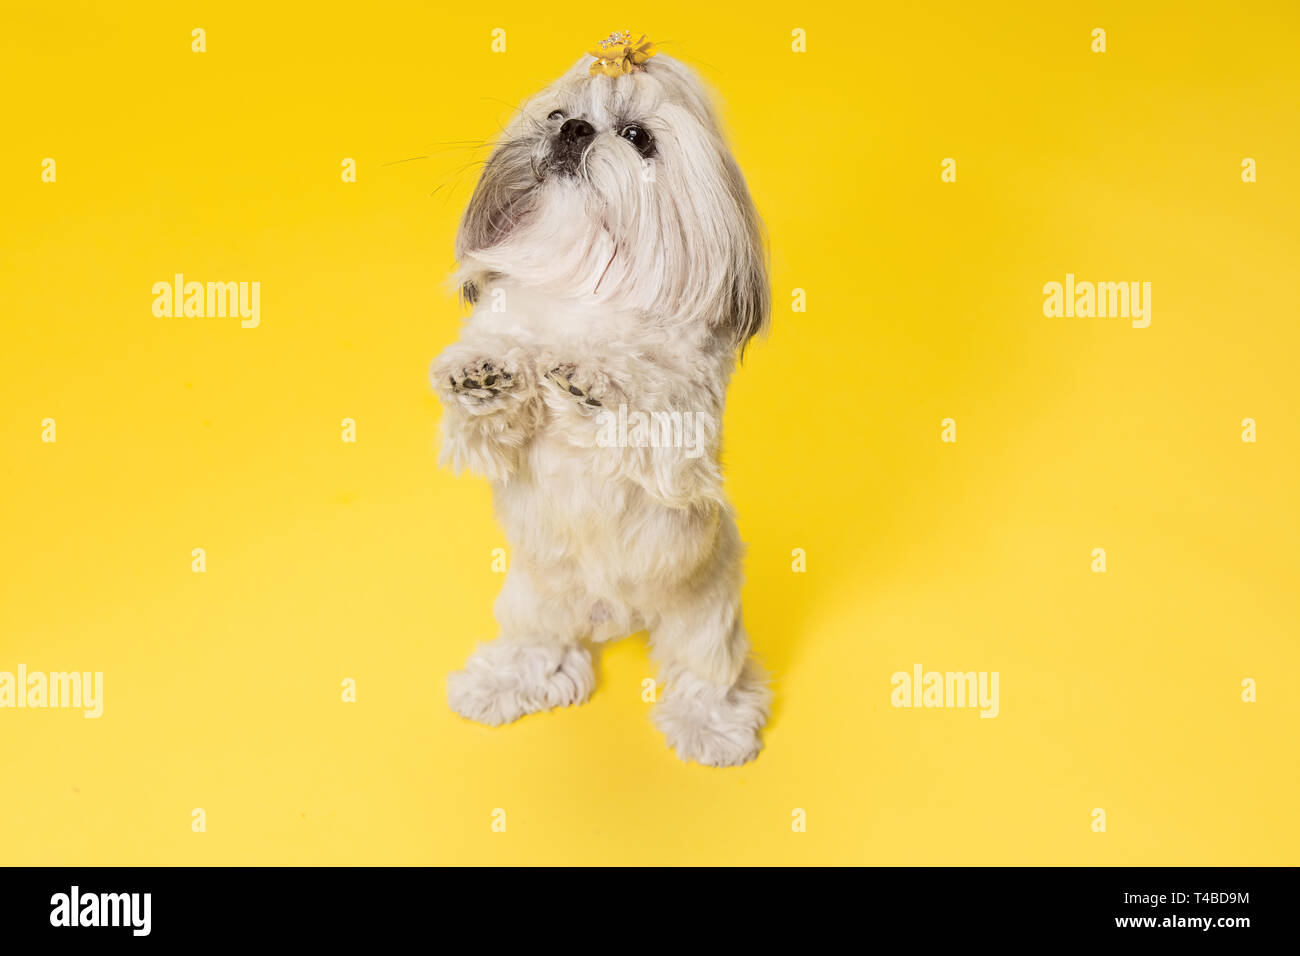 https://c8.alamy.com/comp/T4BD9M/shih-tzu-puppy-wearing-orange-bow-cute-doggy-or-pet-is-standing-isolated-on-yellow-background-the-chrysanthemum-dog-negative-space-to-insert-your-text-or-image-T4BD9M.jpg